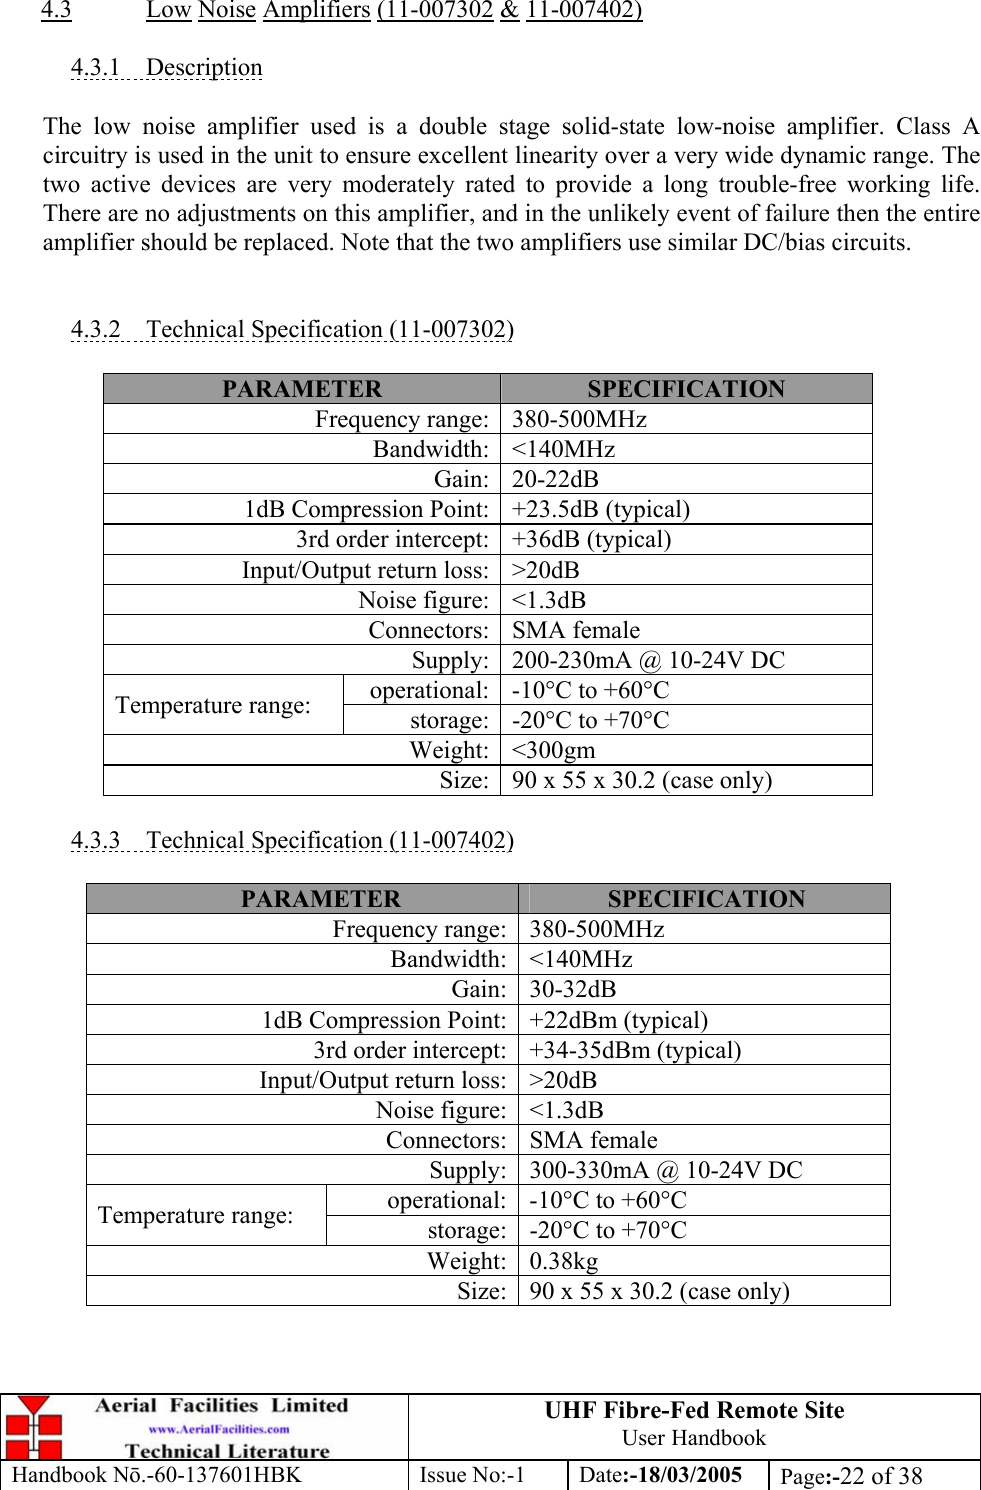 UHF Fibre-Fed Remote Site User Handbook Handbook N.-60-137601HBK Issue No:-1 Date:-18/03/2005  Page:-22 of 38   4.3 Low Noise Amplifiers (11-007302 &amp; 11-007402)  4.3.1 Description  The low noise amplifier used is a double stage solid-state low-noise amplifier. Class A circuitry is used in the unit to ensure excellent linearity over a very wide dynamic range. The two active devices are very moderately rated to provide a long trouble-free working life. There are no adjustments on this amplifier, and in the unlikely event of failure then the entire amplifier should be replaced. Note that the two amplifiers use similar DC/bias circuits.   4.3.2  Technical Specification (11-007302)  PARAMETER  SPECIFICATION Frequency range: 380-500MHz Bandwidth: &lt;140MHz Gain: 20-22dB 1dB Compression Point: +23.5dB (typical) 3rd order intercept: +36dB (typical) Input/Output return loss: &gt;20dB Noise figure: &lt;1.3dB Connectors: SMA female Supply: 200-230mA @ 10-24V DC operational: -10°C to +60°C Temperature range:  storage: -20°C to +70°C Weight: &lt;300gm Size: 90 x 55 x 30.2 (case only)  4.3.3  Technical Specification (11-007402)  PARAMETER  SPECIFICATION Frequency range: 380-500MHz Bandwidth: &lt;140MHz Gain: 30-32dB 1dB Compression Point: +22dBm (typical) 3rd order intercept: +34-35dBm (typical) Input/Output return loss: &gt;20dB Noise figure: &lt;1.3dB Connectors: SMA female Supply: 300-330mA @ 10-24V DC operational: -10°C to +60°C Temperature range:  storage: -20°C to +70°C Weight: 0.38kg Size: 90 x 55 x 30.2 (case only) 